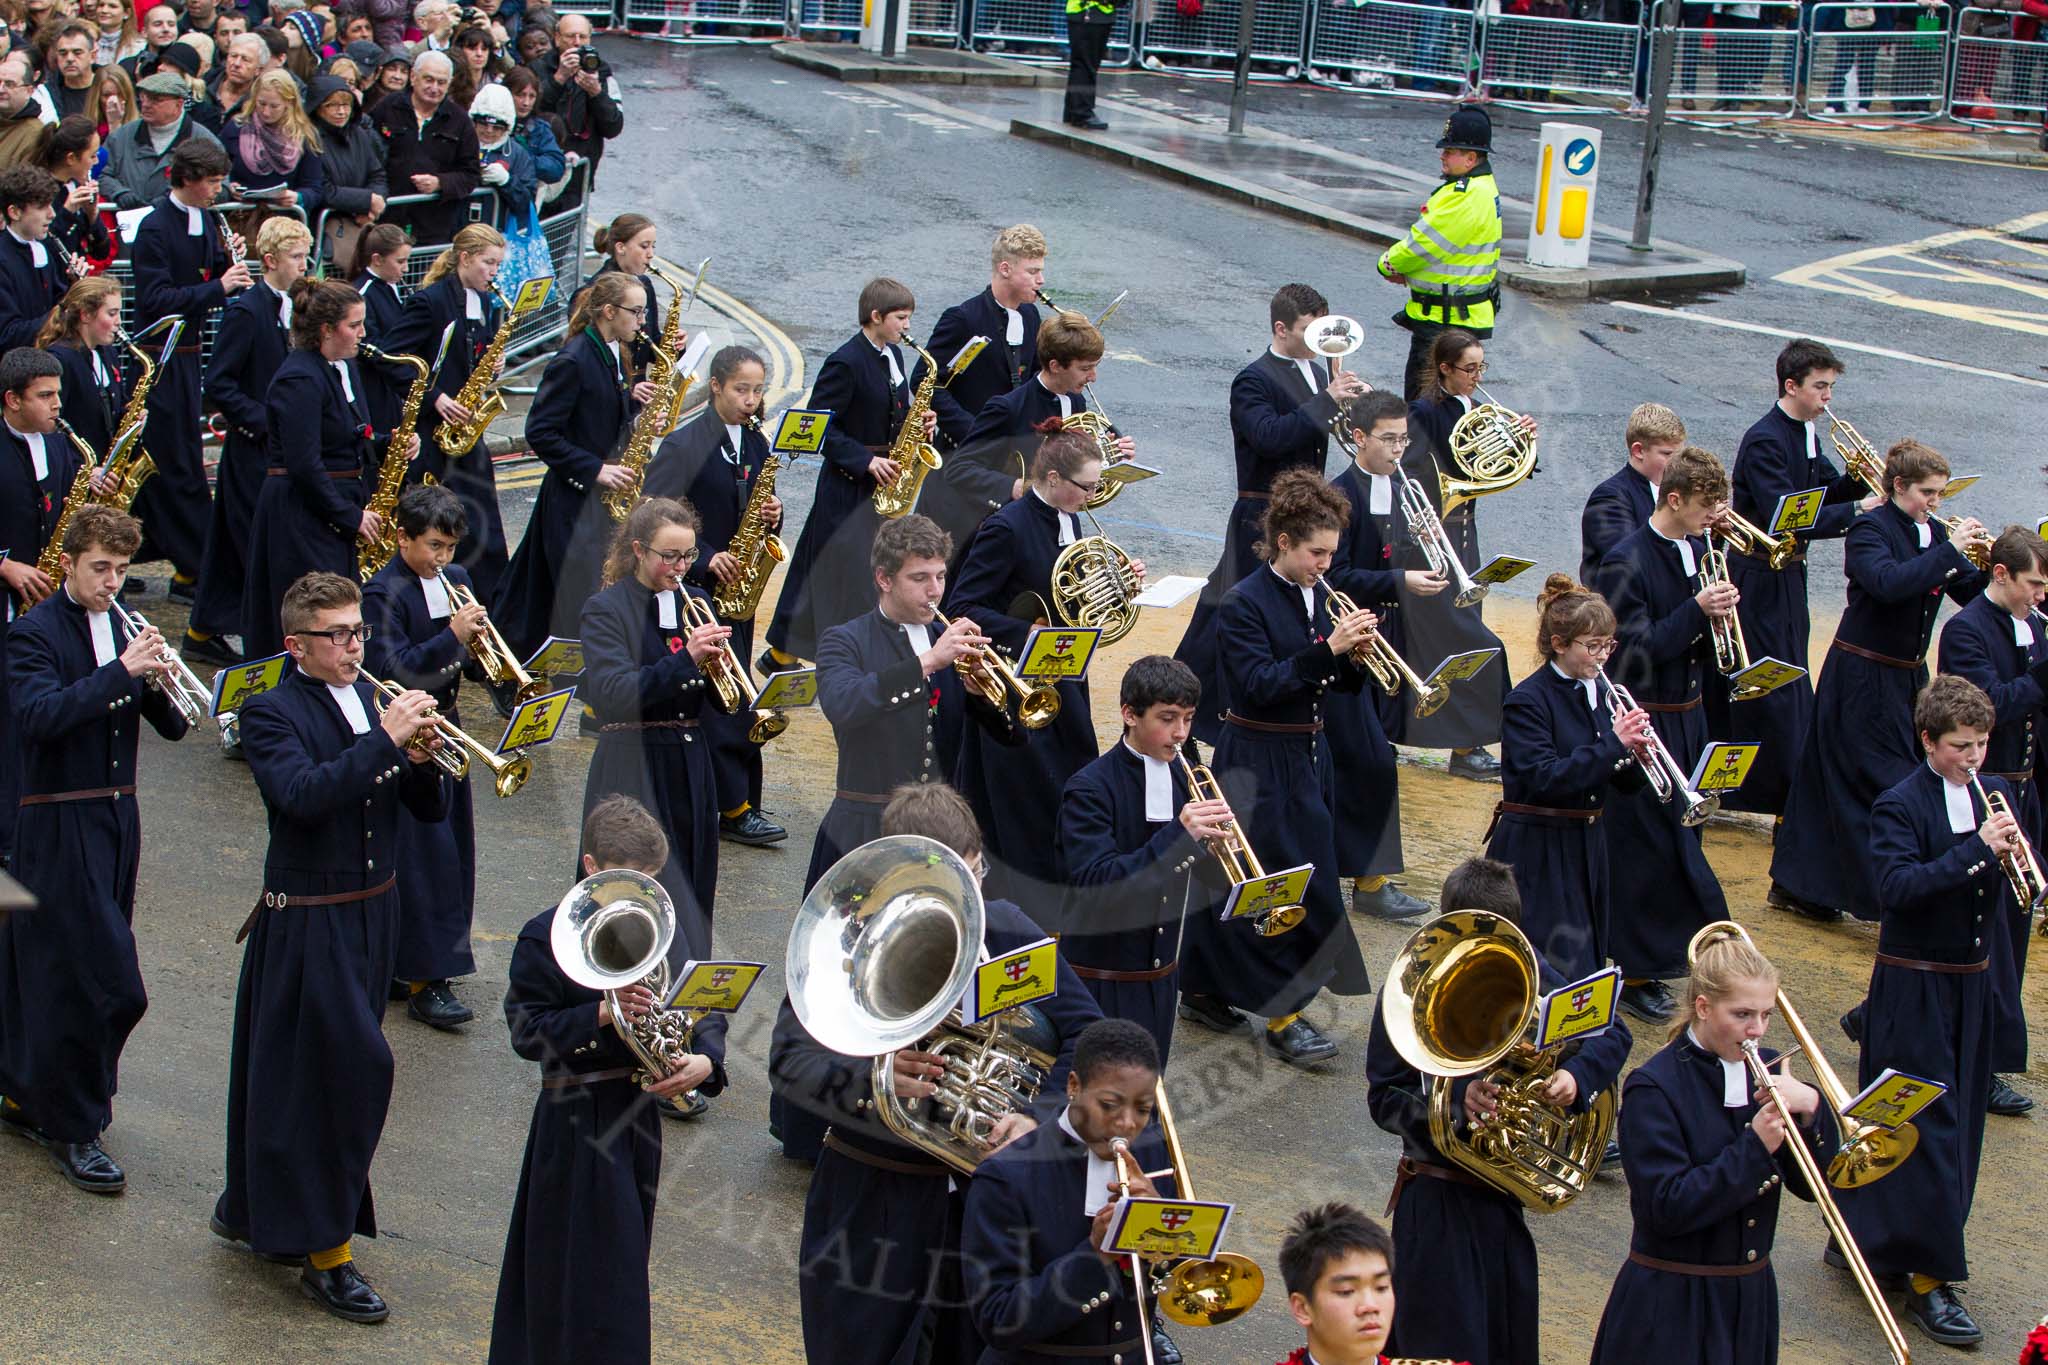 Lord Mayor's Show 2012: Entry 123 - Christ's Hospital School Band..
Press stand opposite Mansion House, City of London,
London,
Greater London,
United Kingdom,
on 10 November 2012 at 12:02, image #1771